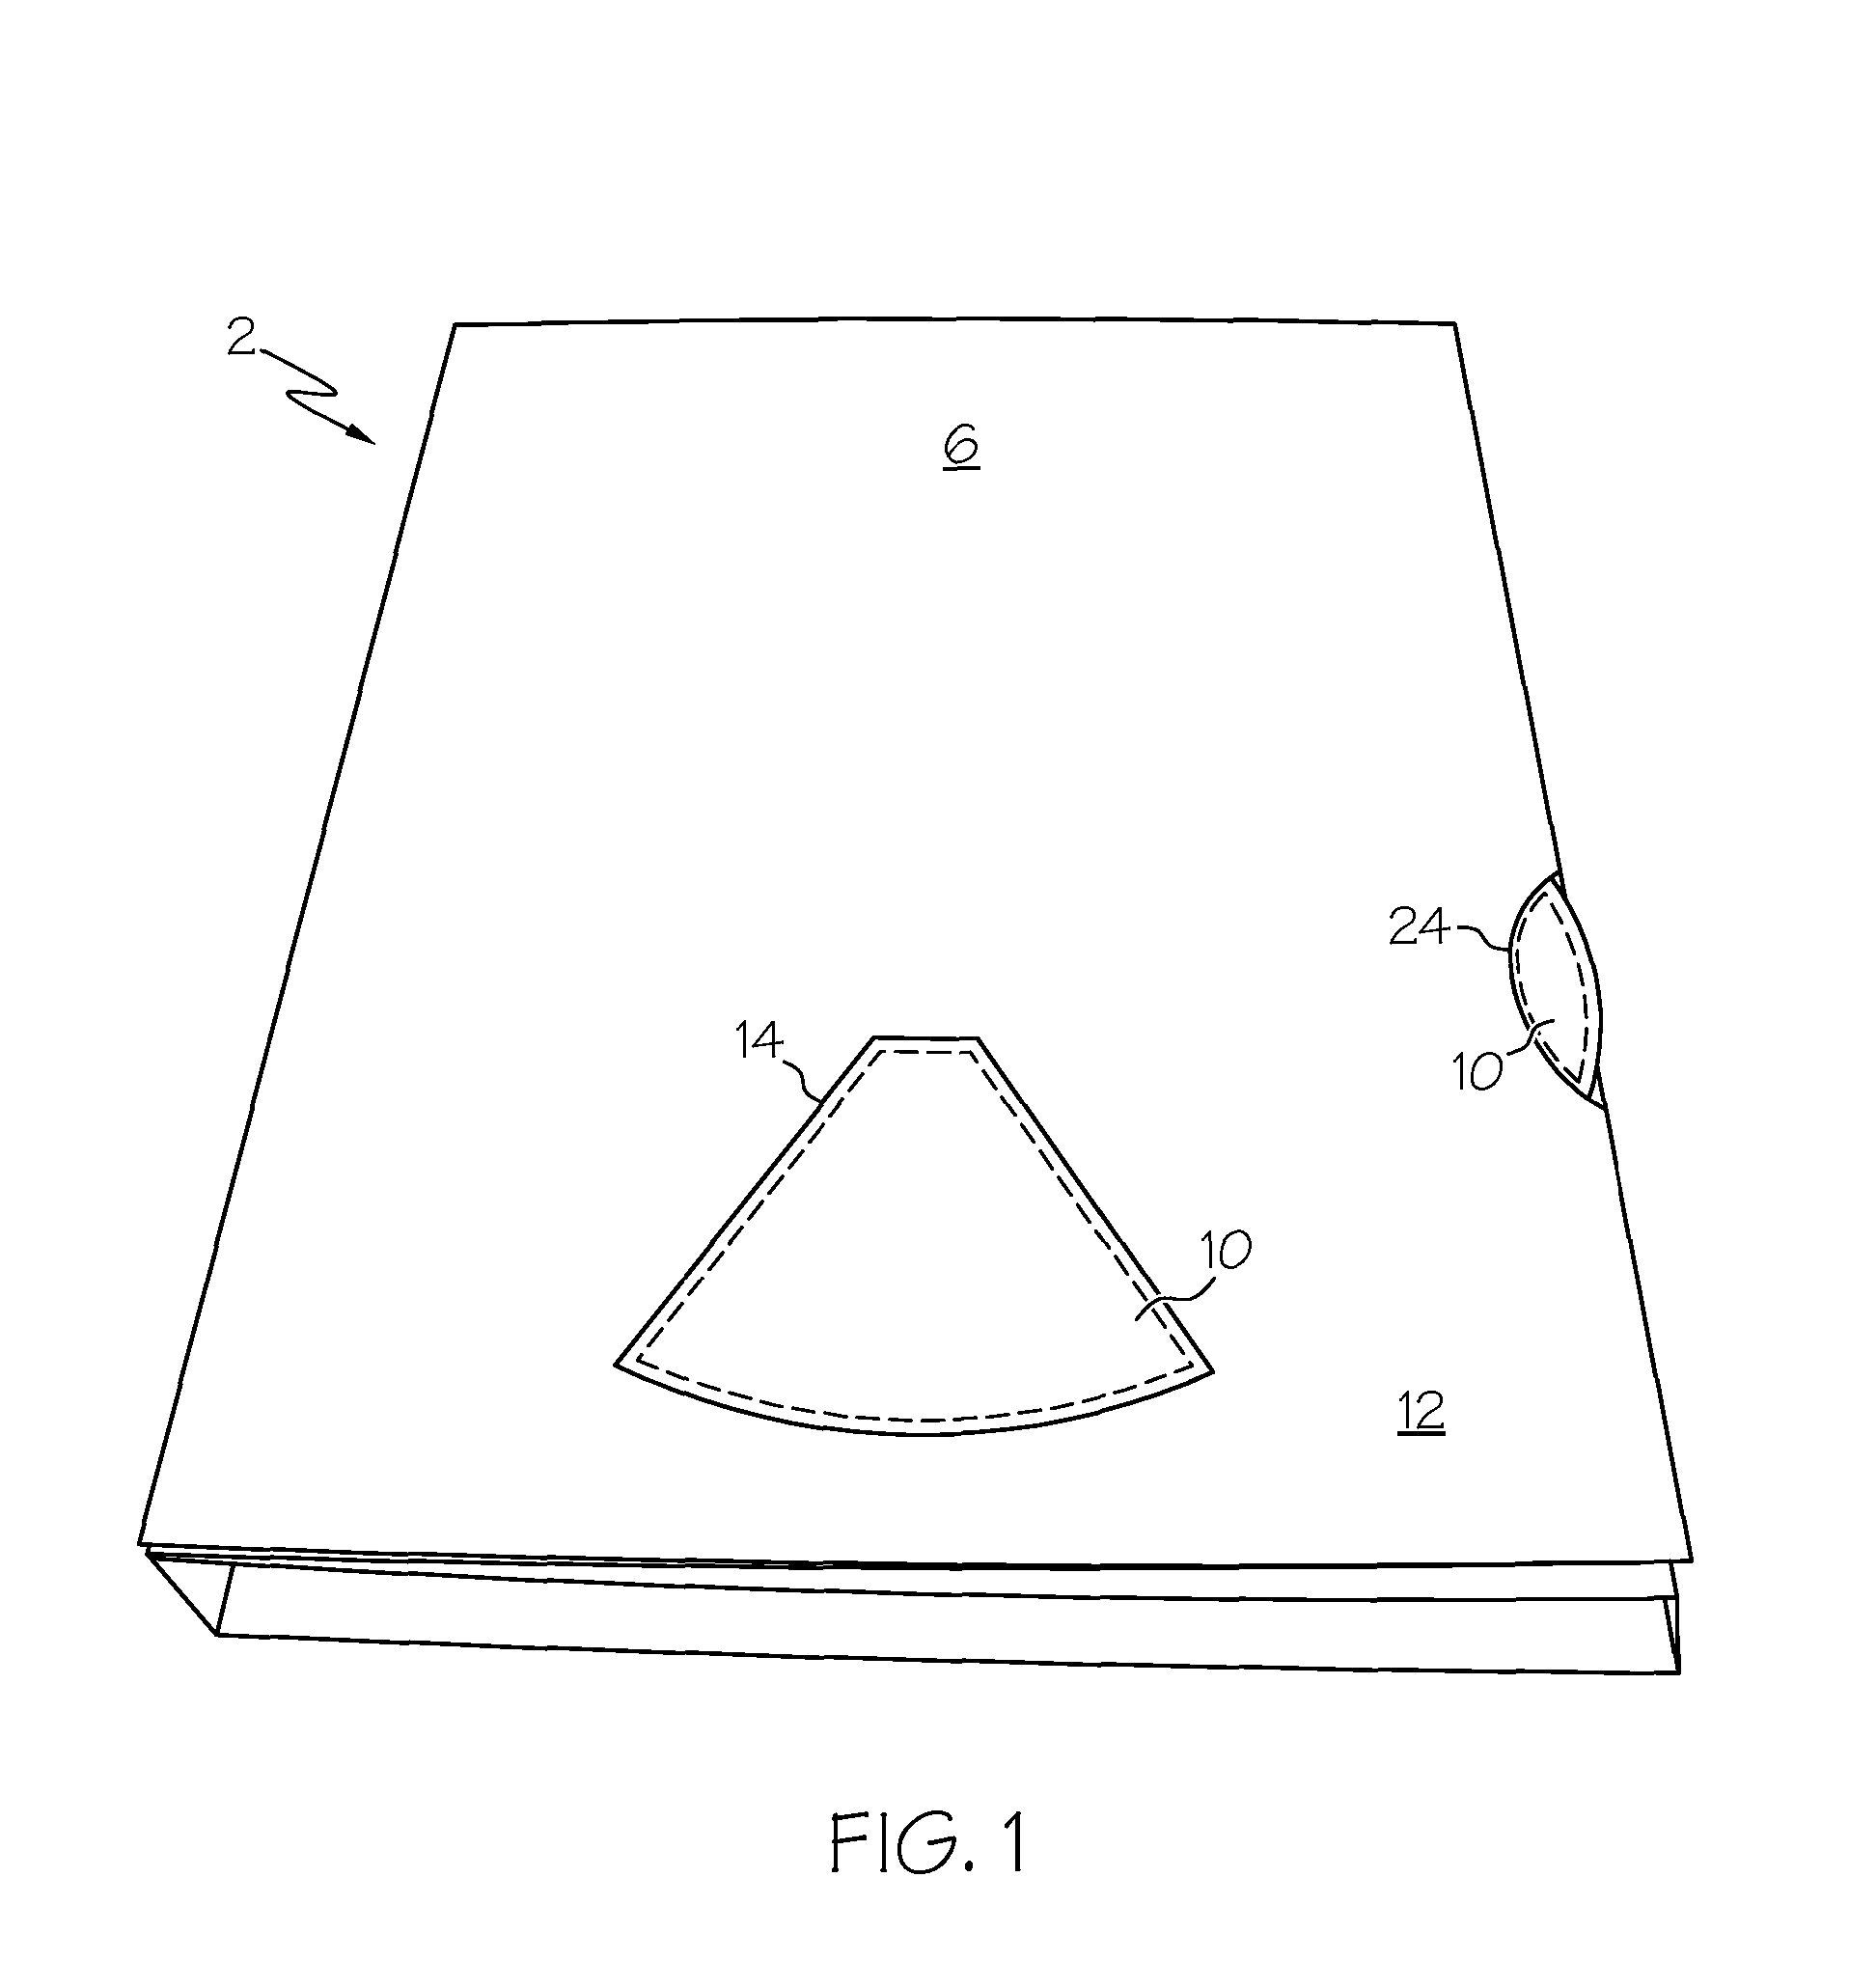 Merchandise package with rotatable display element